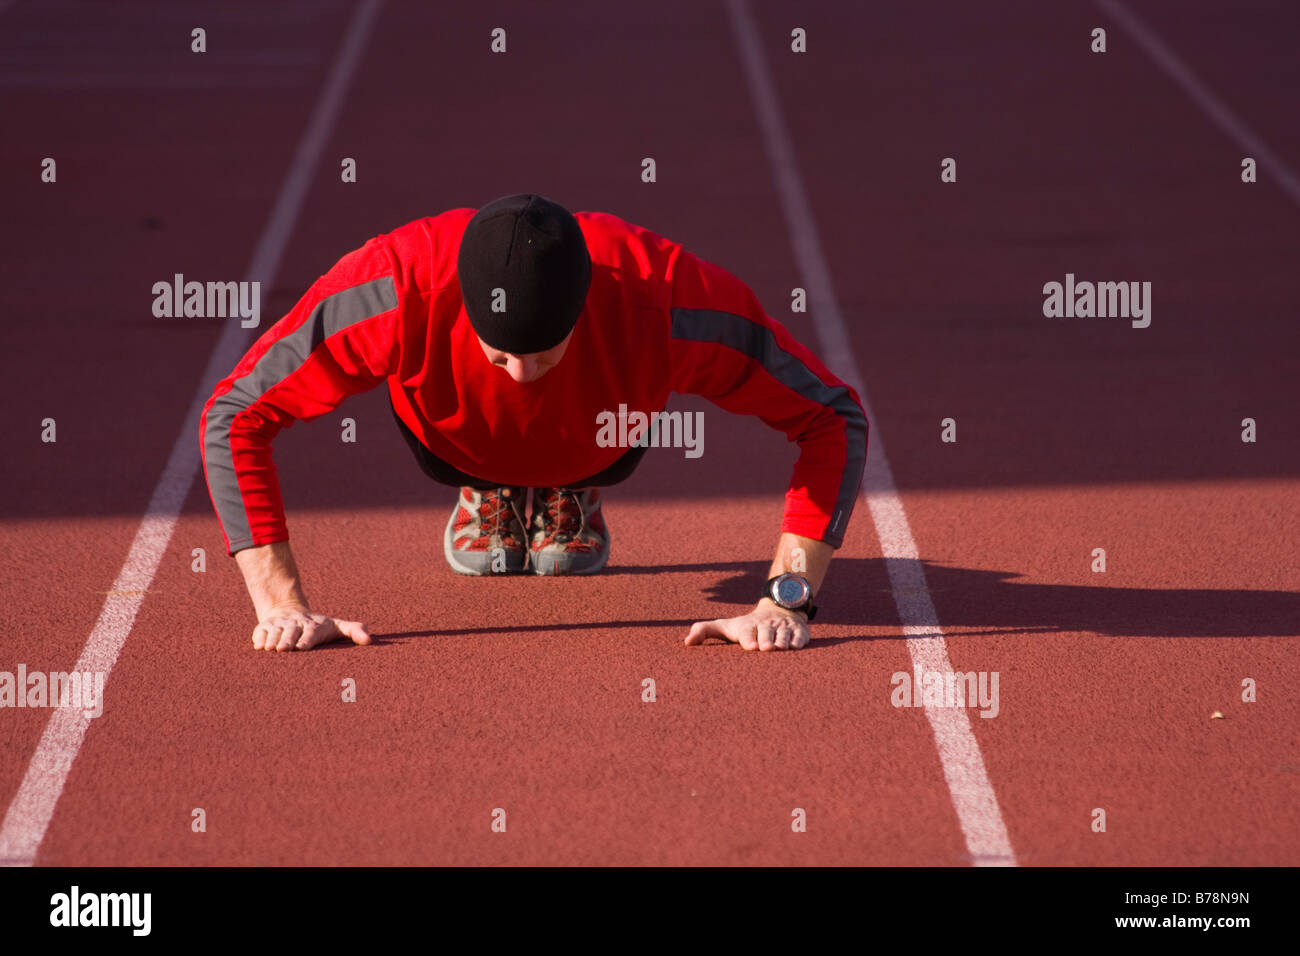 A man doing a pushup on a track before running in Reno in Nevada Stock Photo